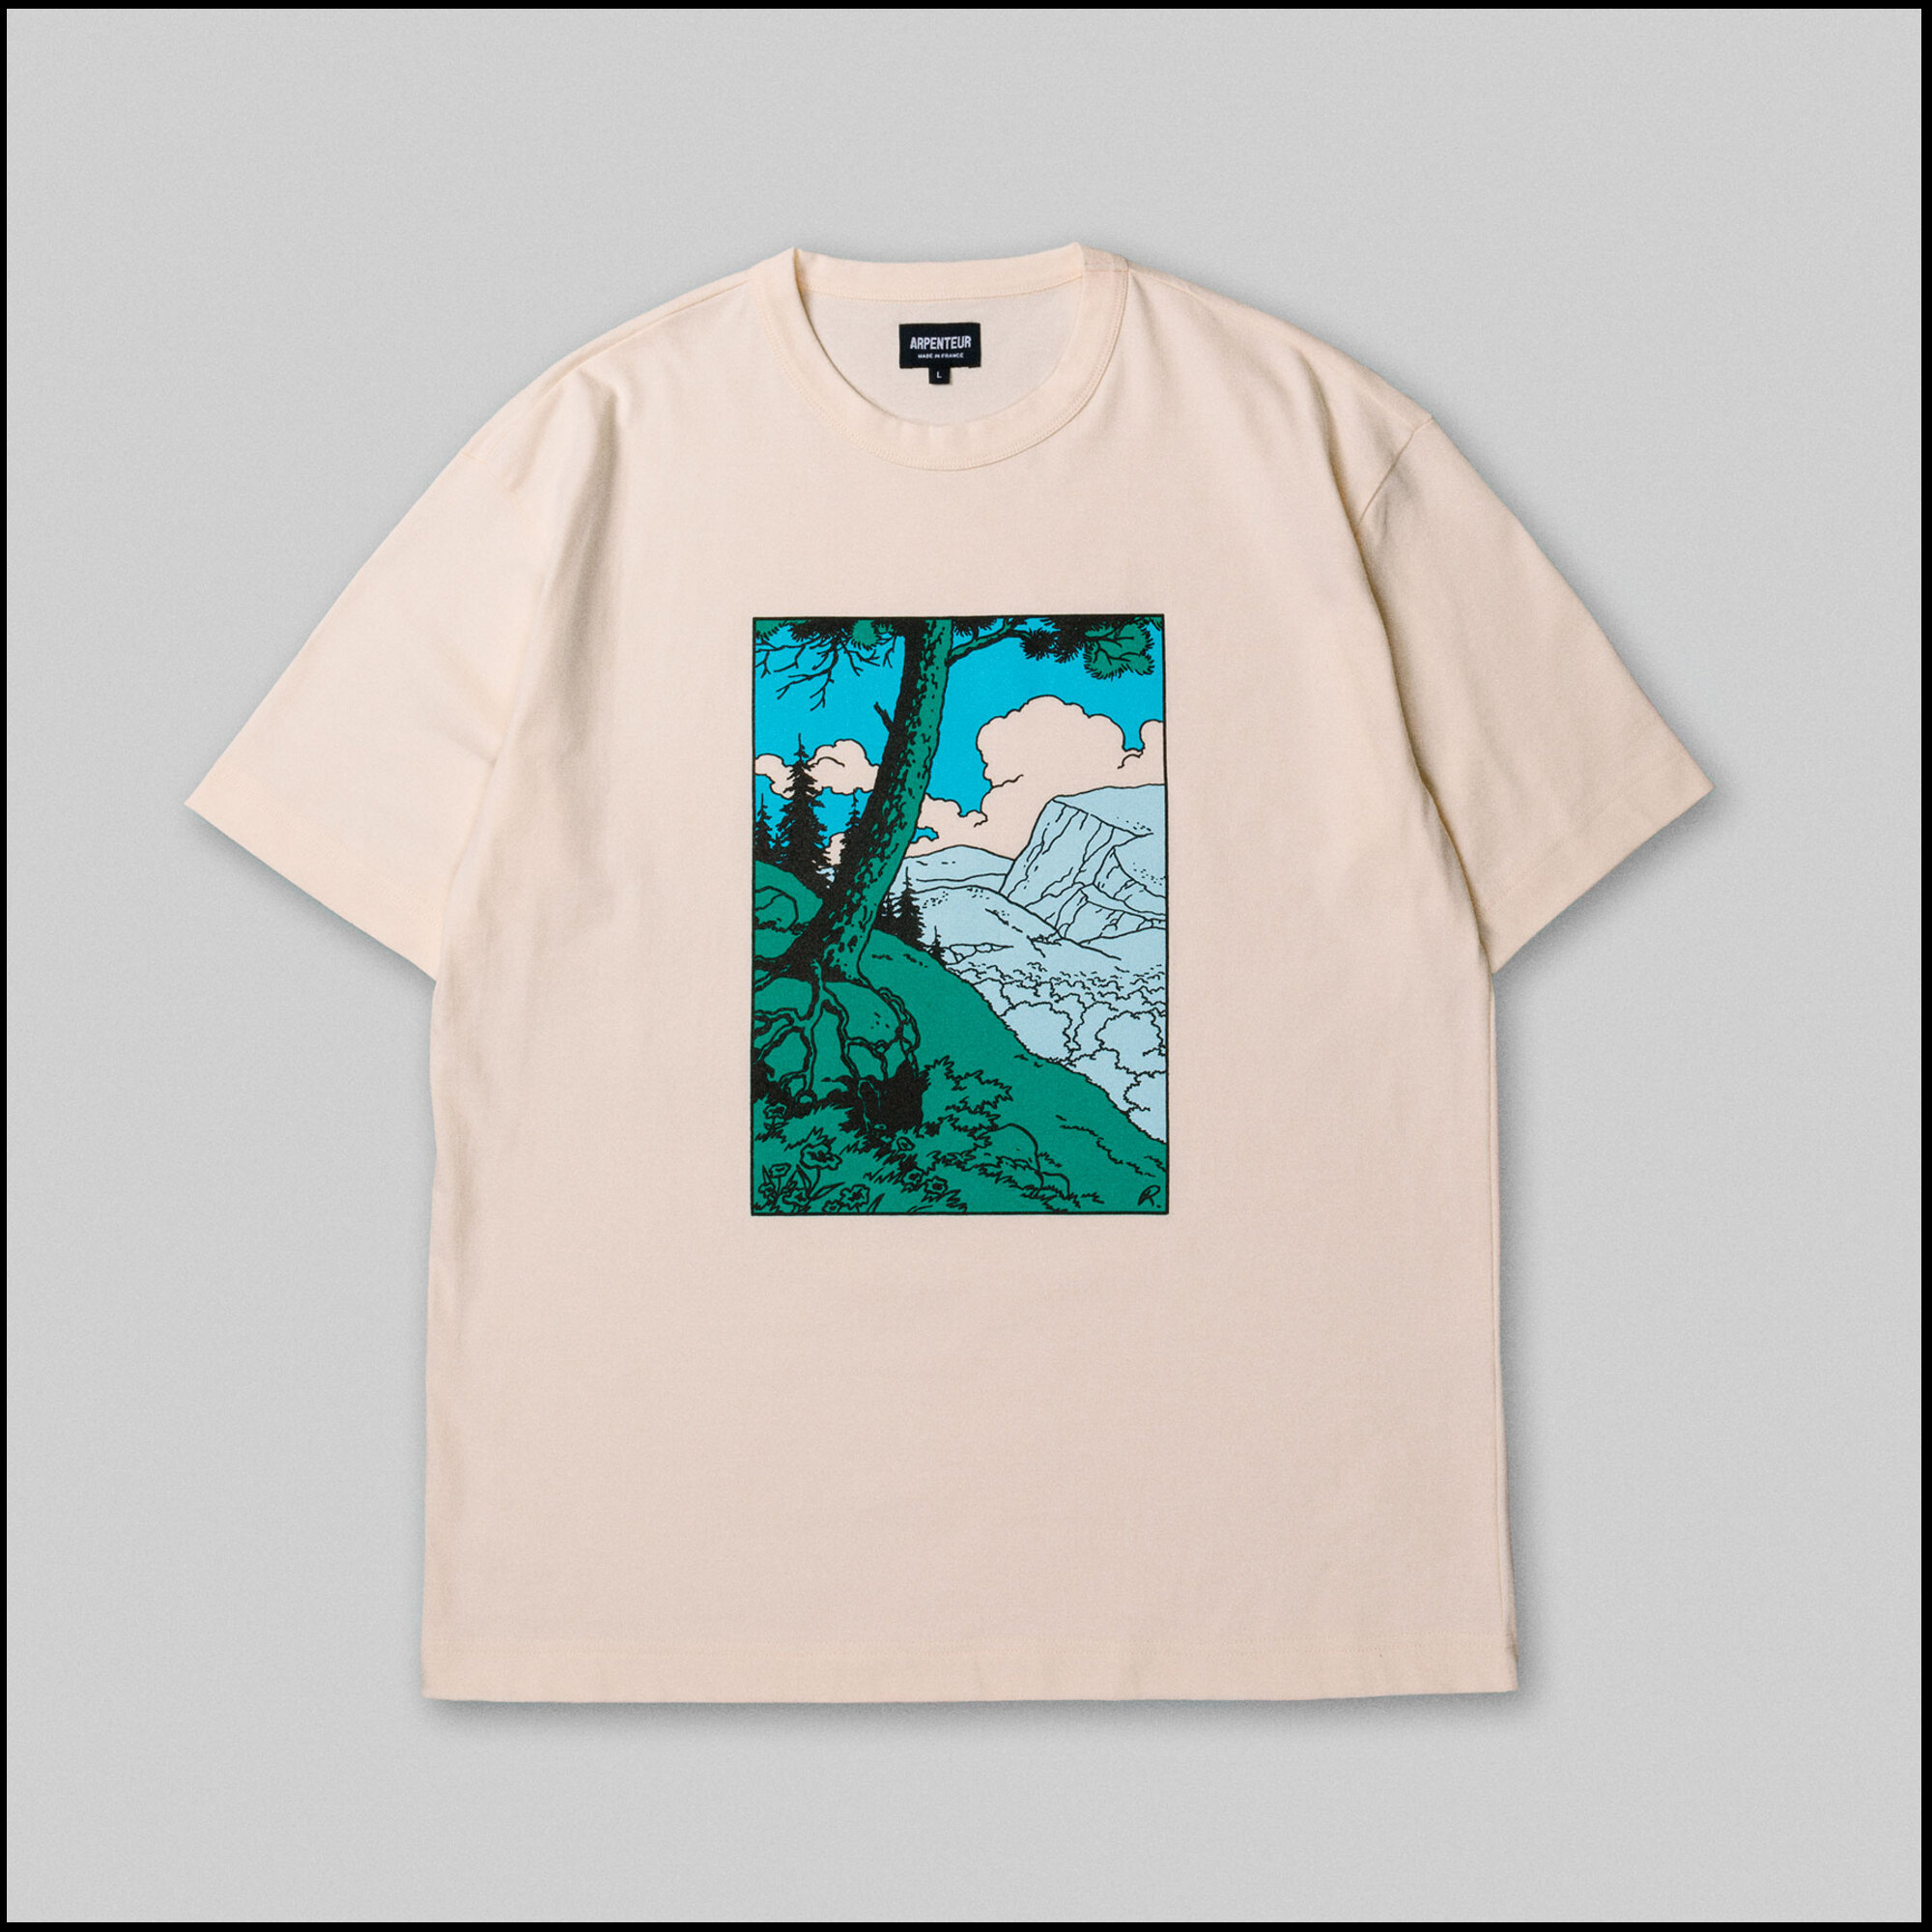 GRAPHIQUE T-shirt by Arpenteur in Green valley color